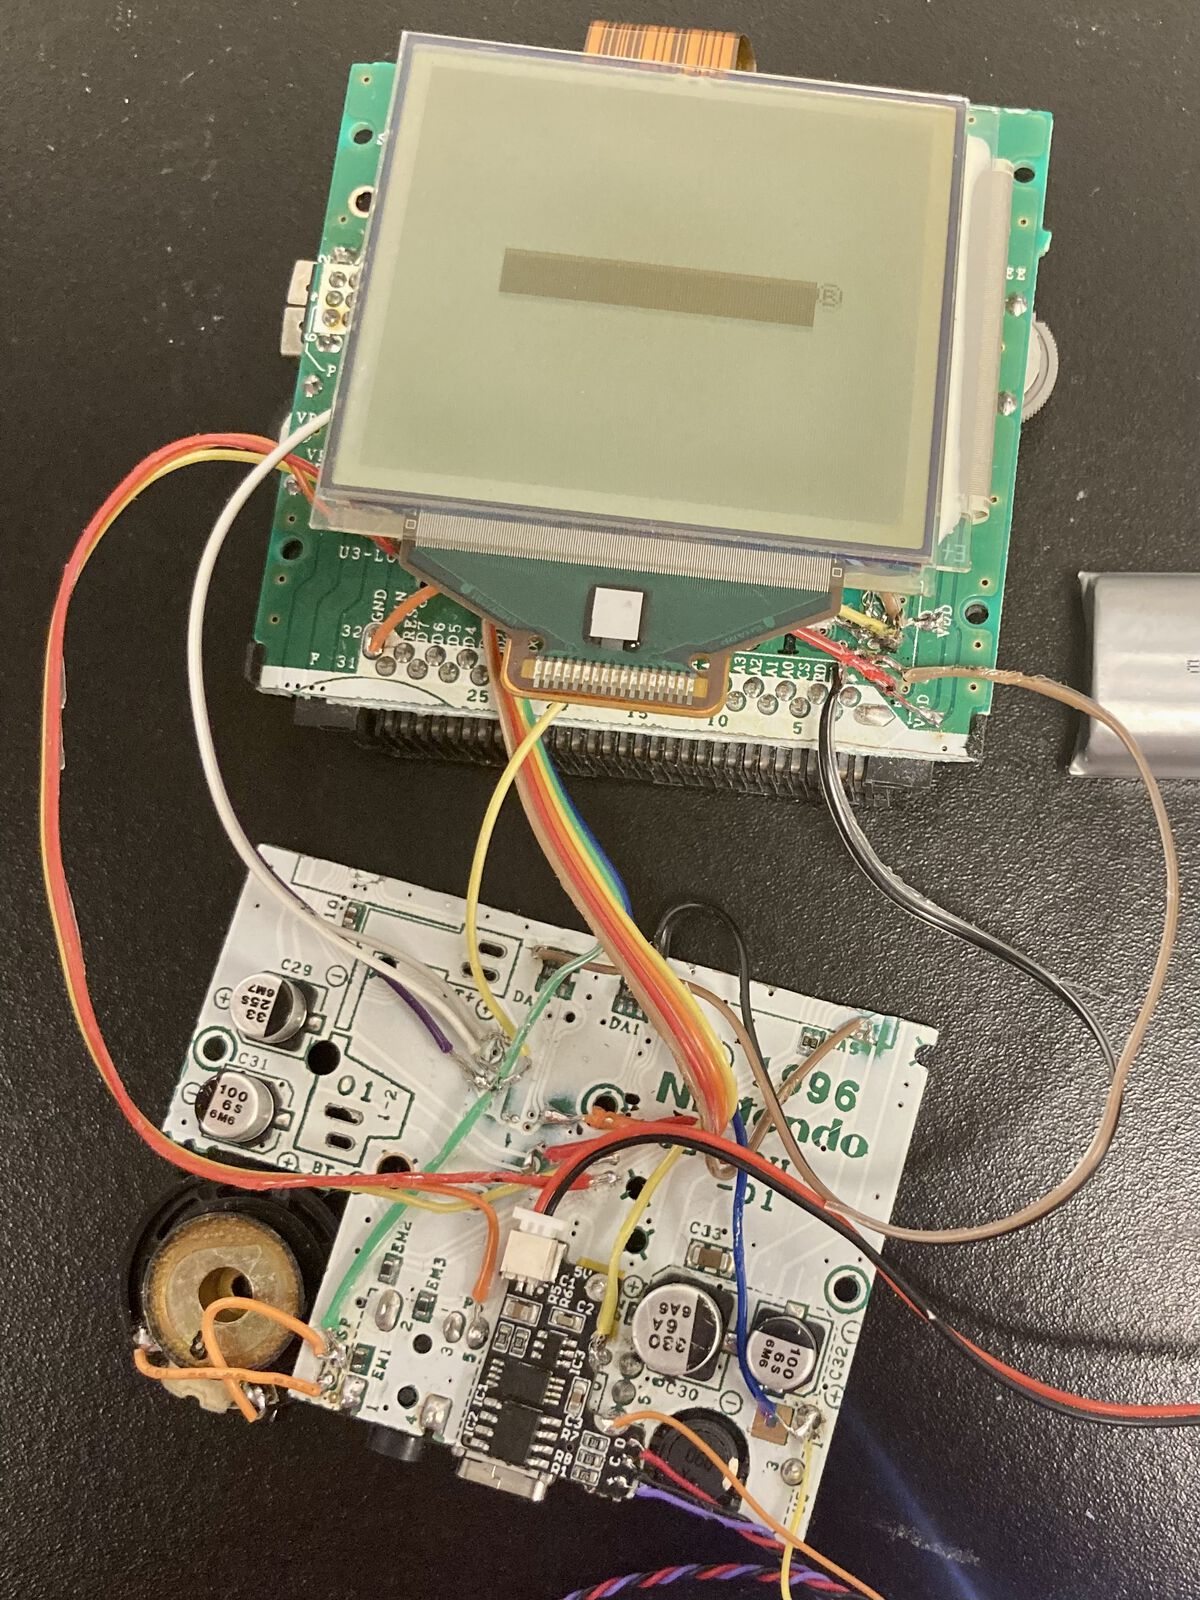 Two halves of the Pocket board with a bunch of wires connecting them. It’s kind of gruesome, but the Game Boy boots.